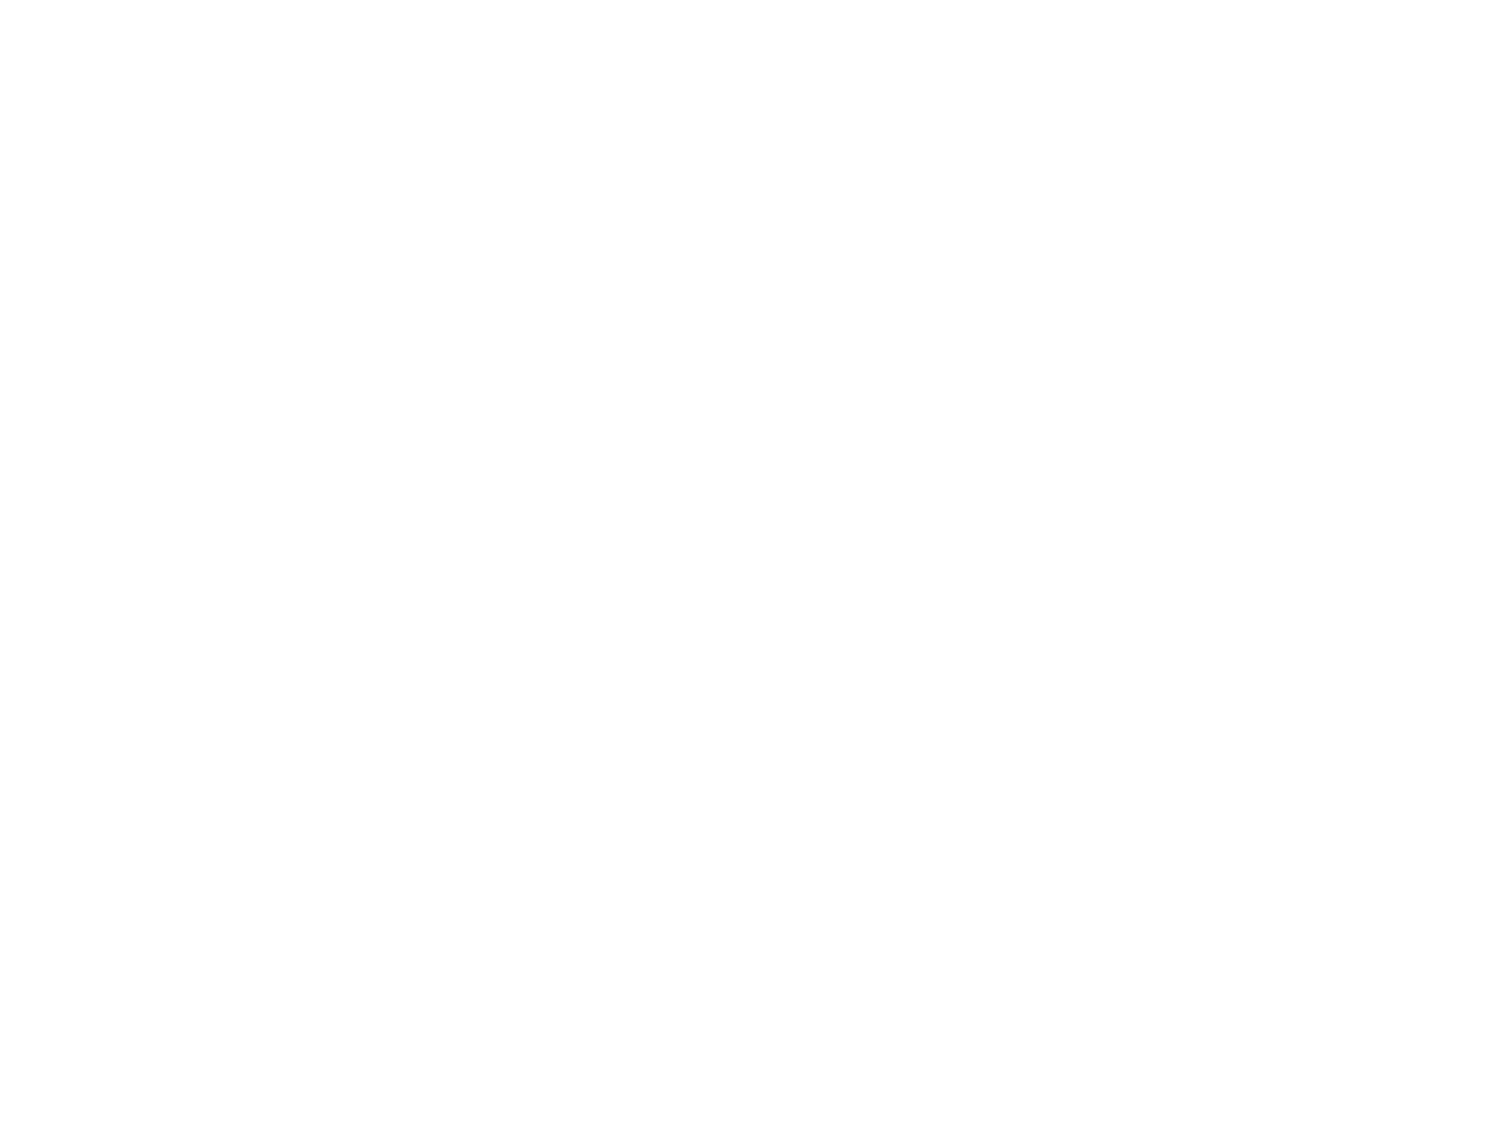 New Temple Vancouver